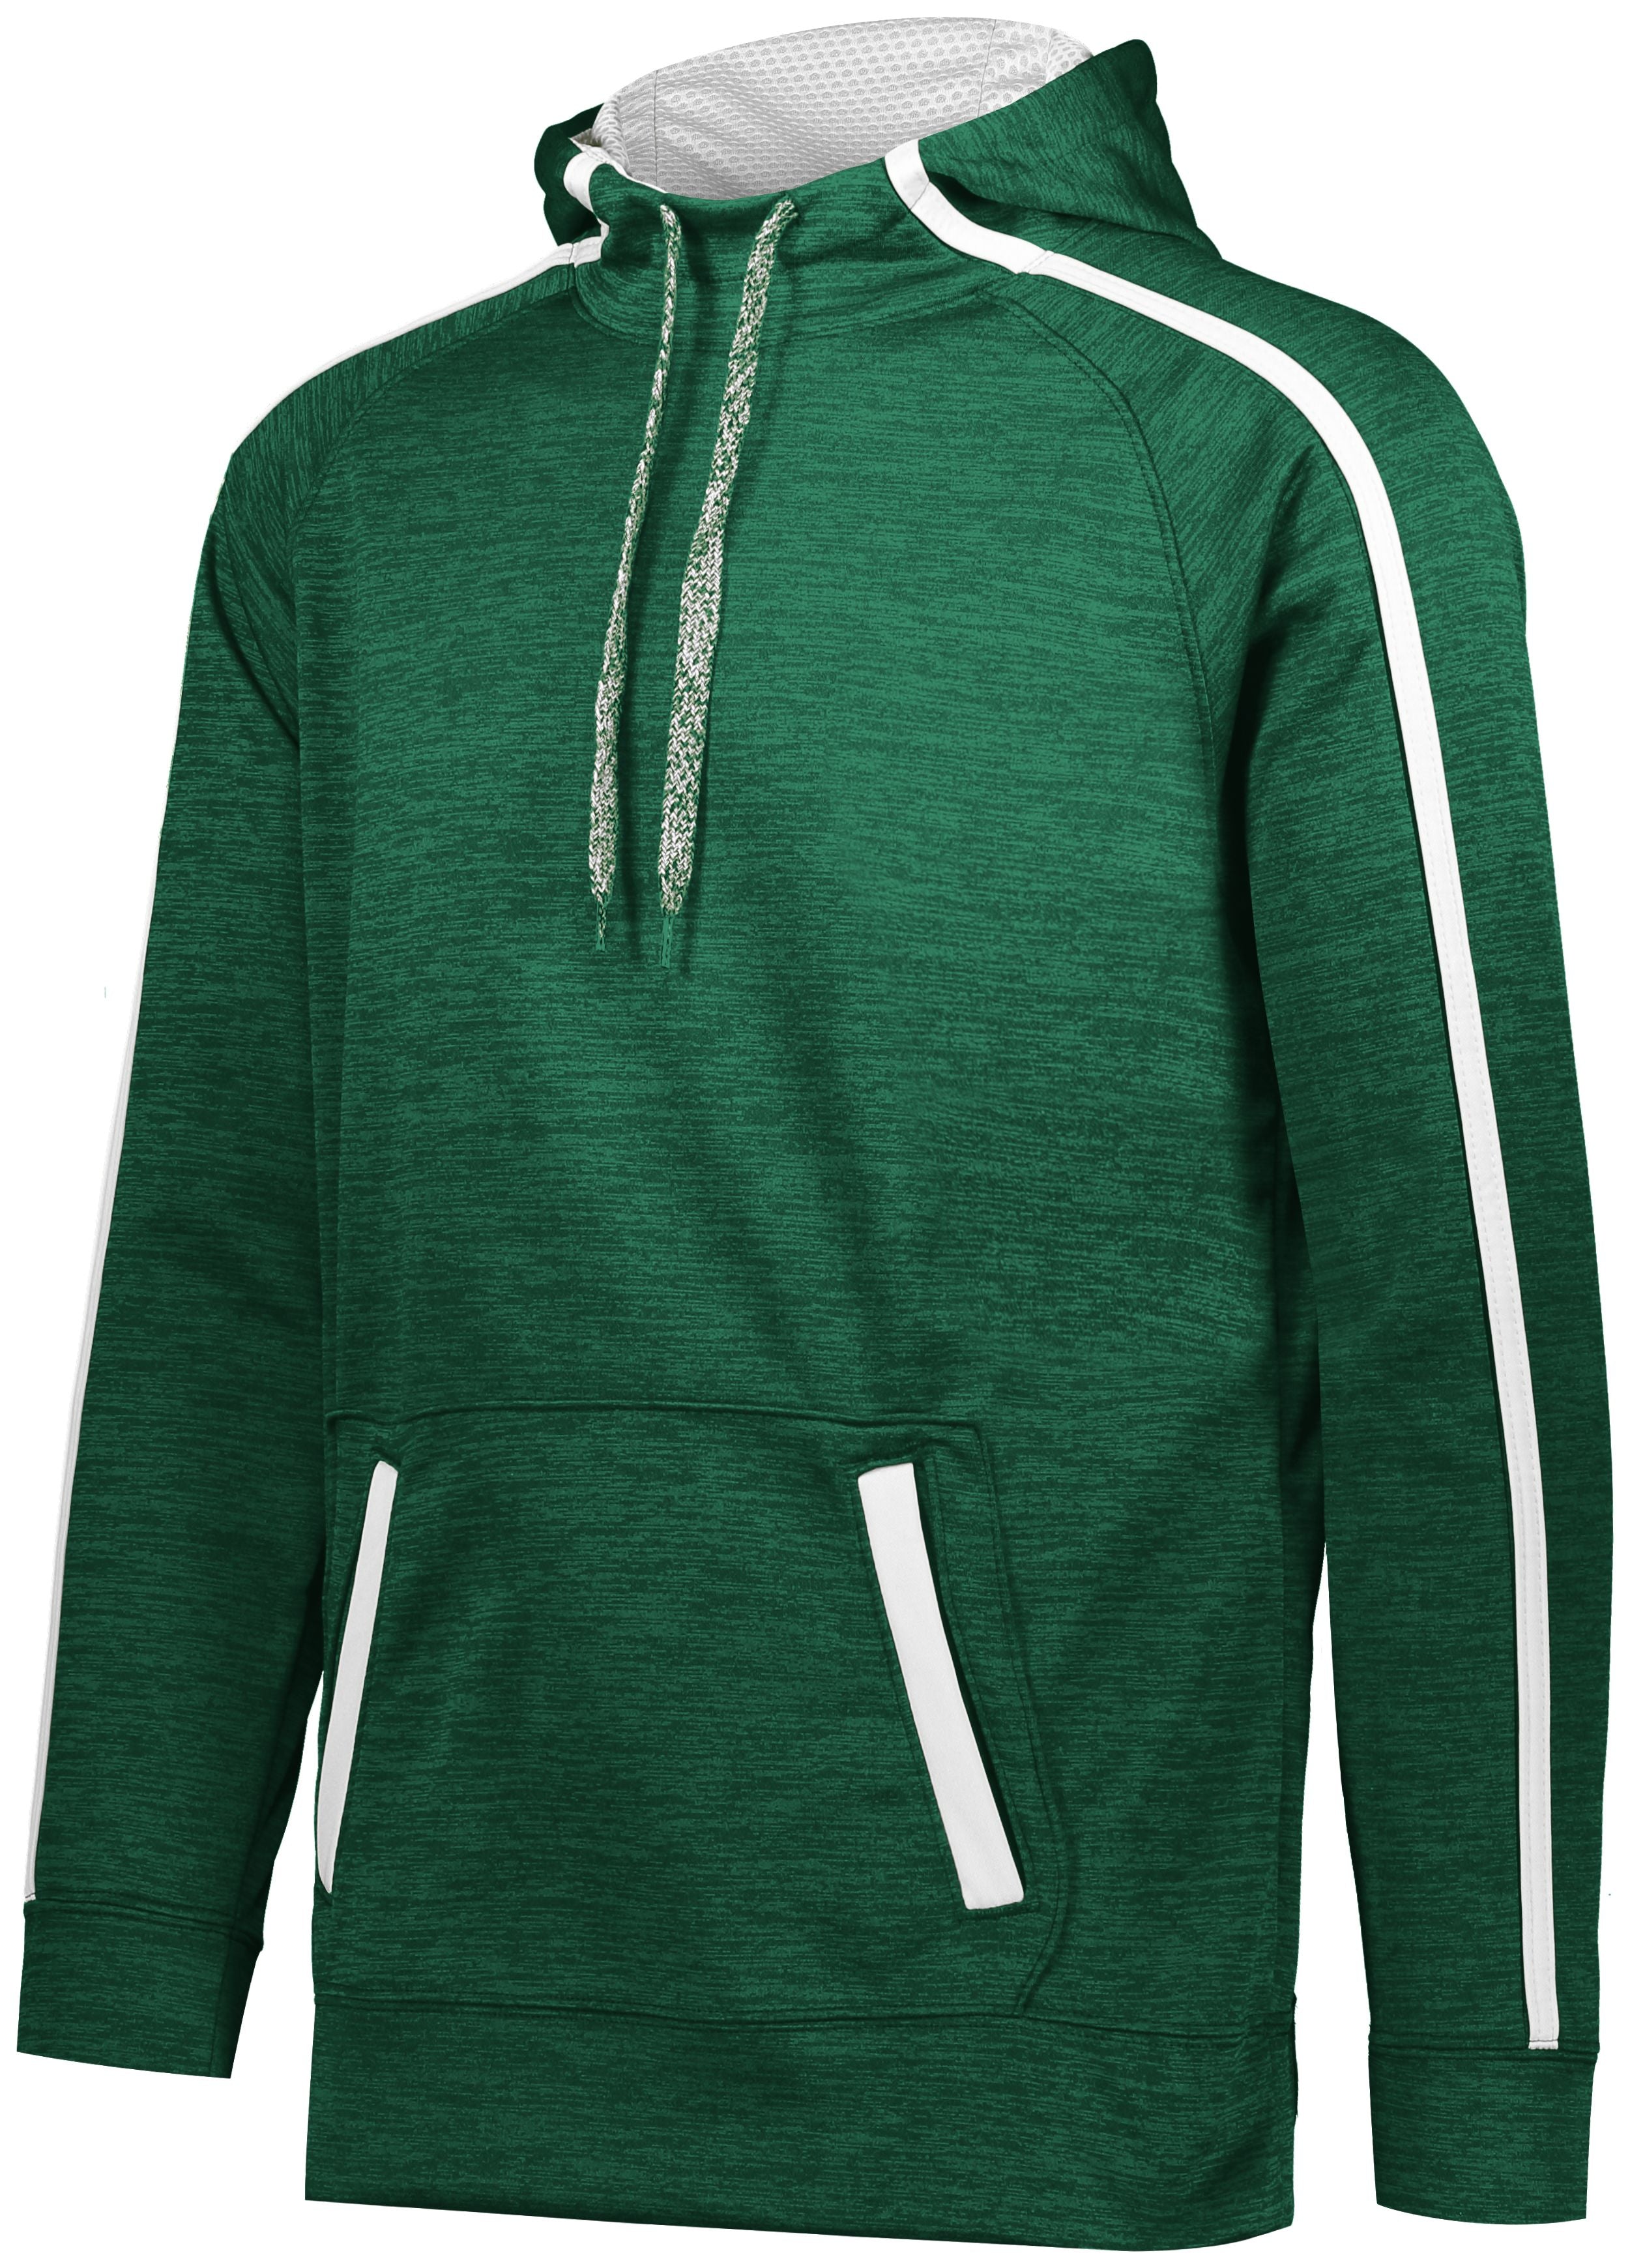 Augusta Sportswear Stoked Tonal Heather Hoodie in Dark Green/White  -Part of the Adult, Augusta-Products, Shirts, Tonal-Fleece-Collection product lines at KanaleyCreations.com